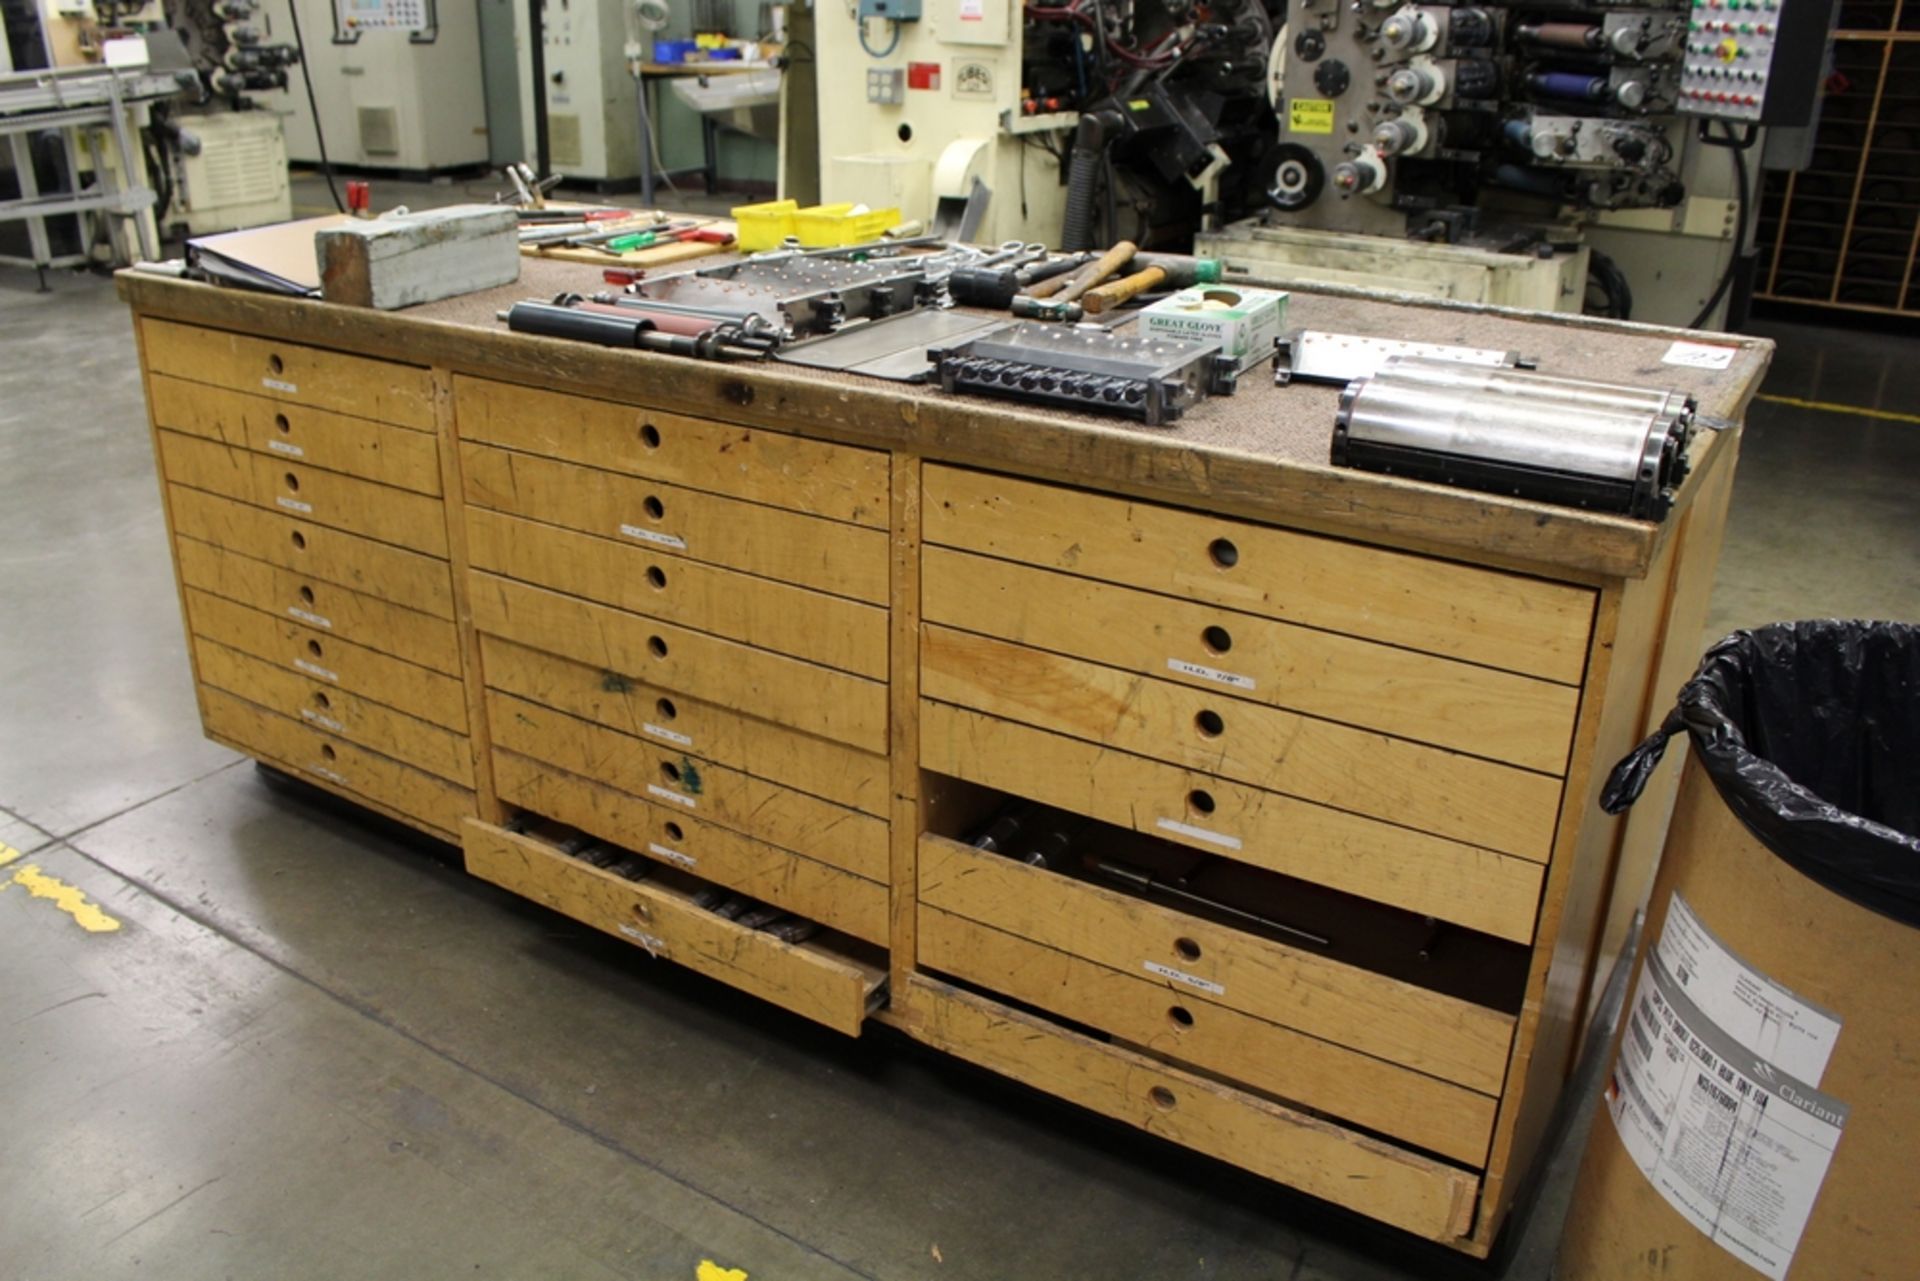 LOT - ISLAND CABINET W/ DRAWERS ON BOTH SIDES, FULL OF OMSO SCREEN PRINTER TOOLING - Image 2 of 25